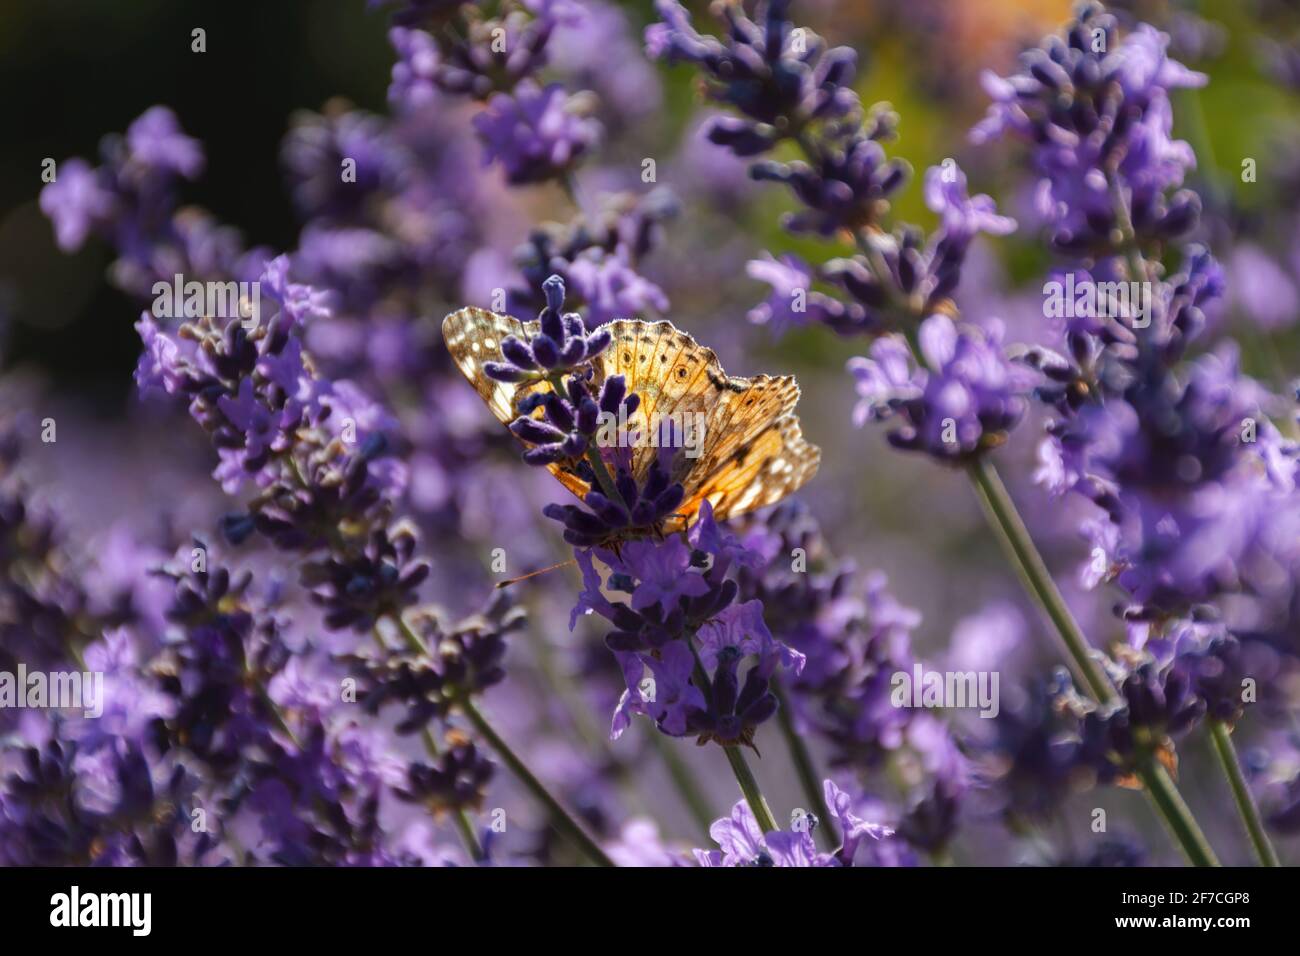 Painted lady butterfly on lavender flowers. Sunny spring background with flowers and insects. Orange butterfly on lilac flowers in soft focus. Macro p Stock Photo